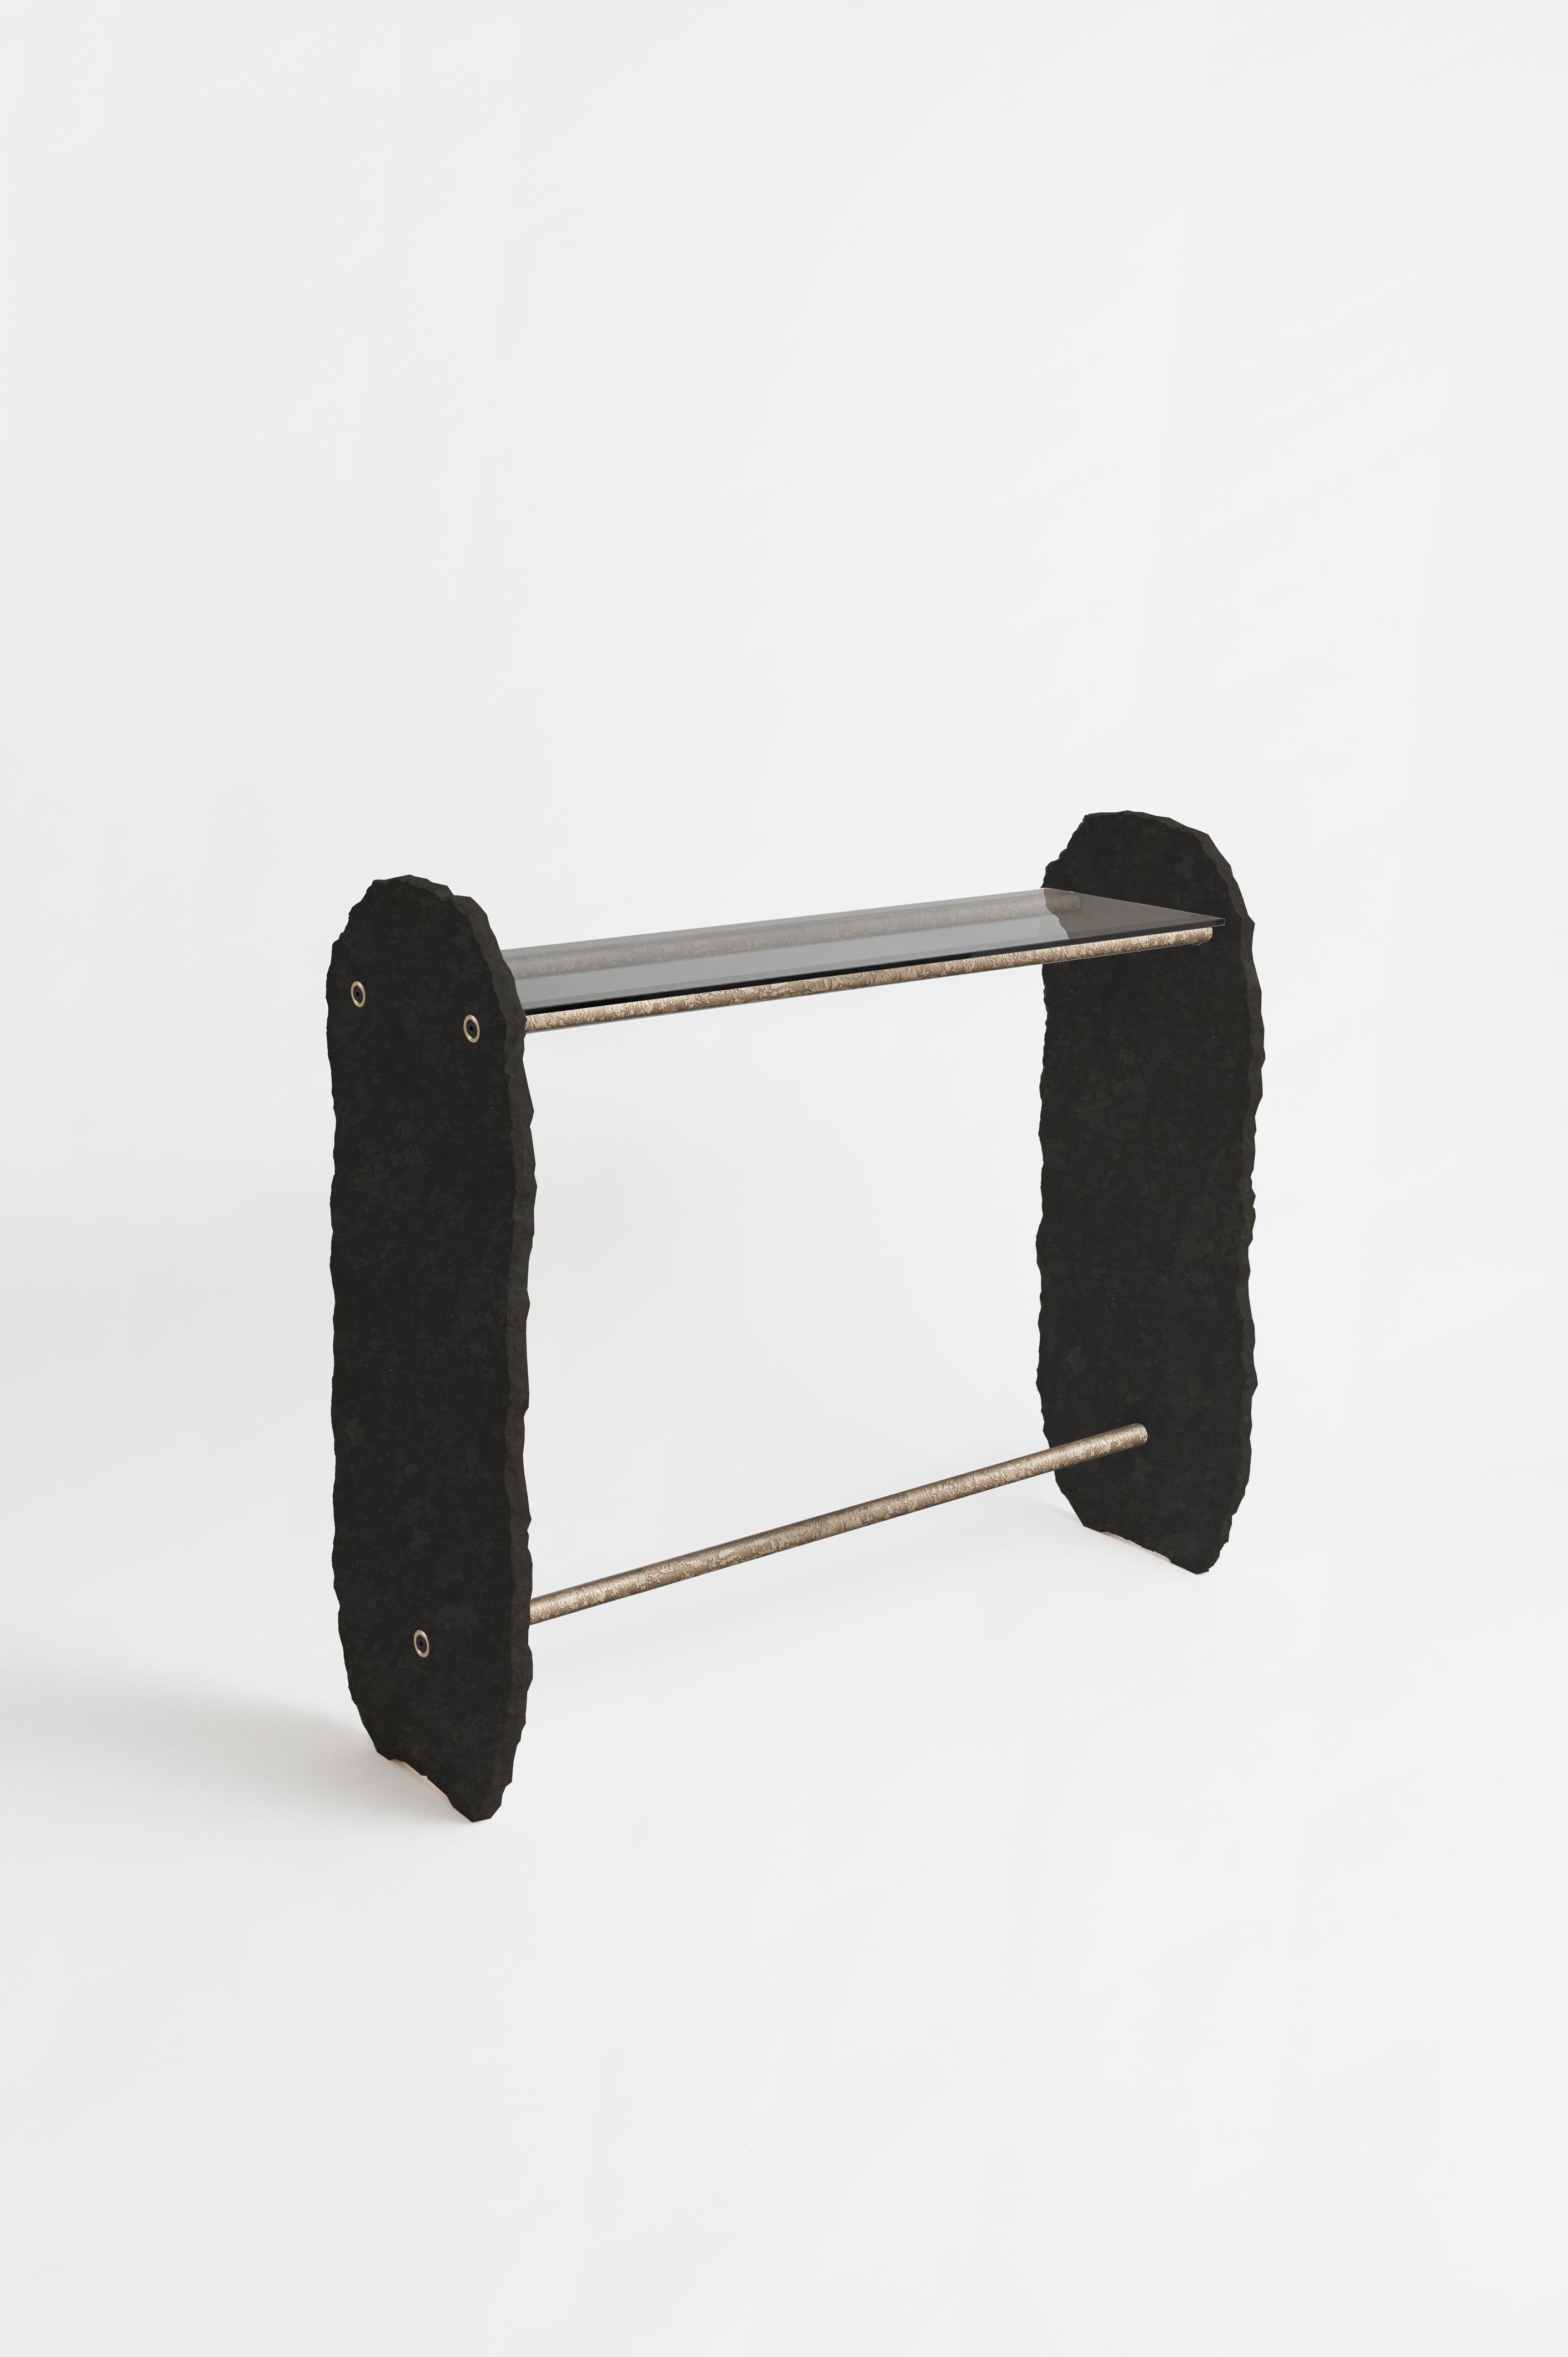 Black stone and brass Stoique stole console signed by Fre´de´ric Saulou
Materials: Black stone, Grey smoked glass, engraved patinated brass.
Dimensions: H 110 x 40 x 110 cm.

